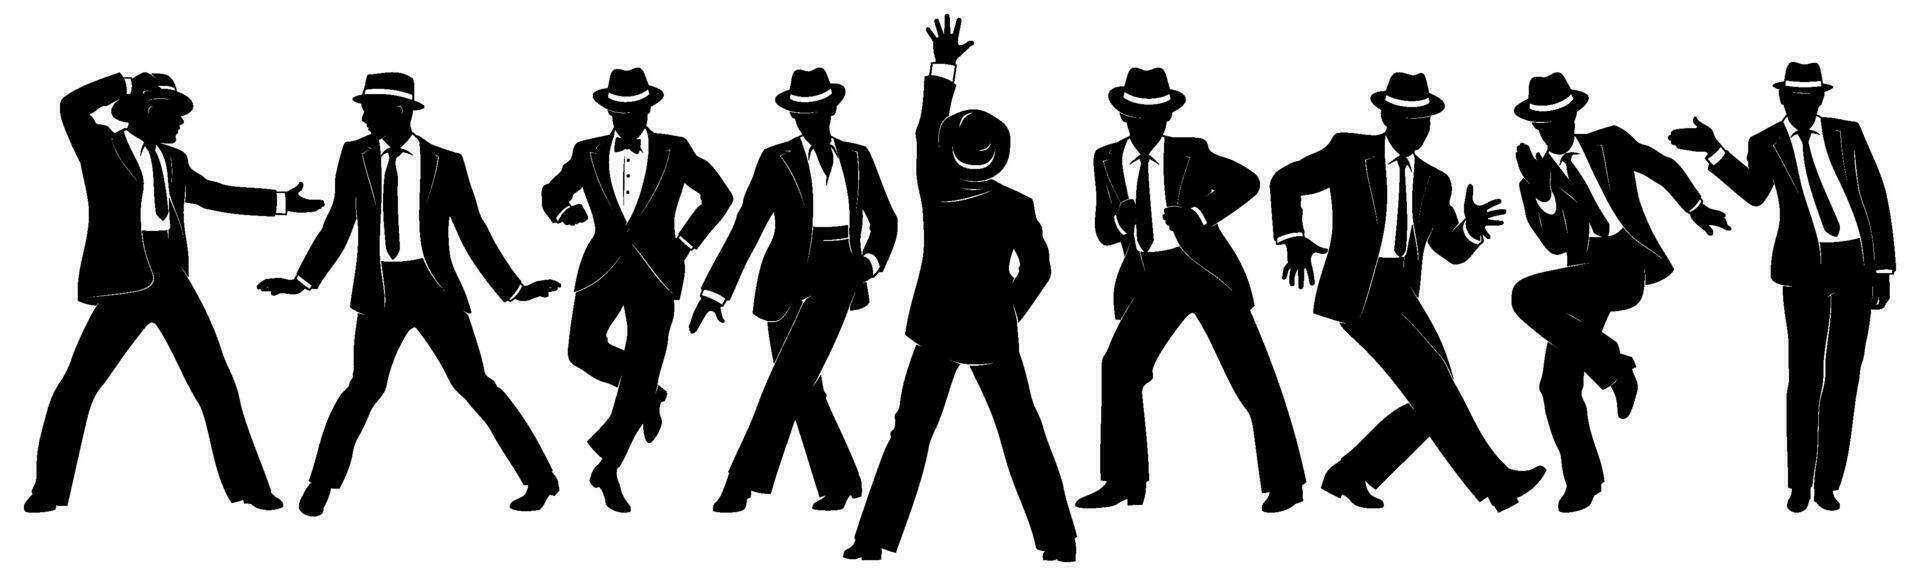 Silhouettes Set of Dancing Men in classic suits and hats. Vector cliparts isolated on white.